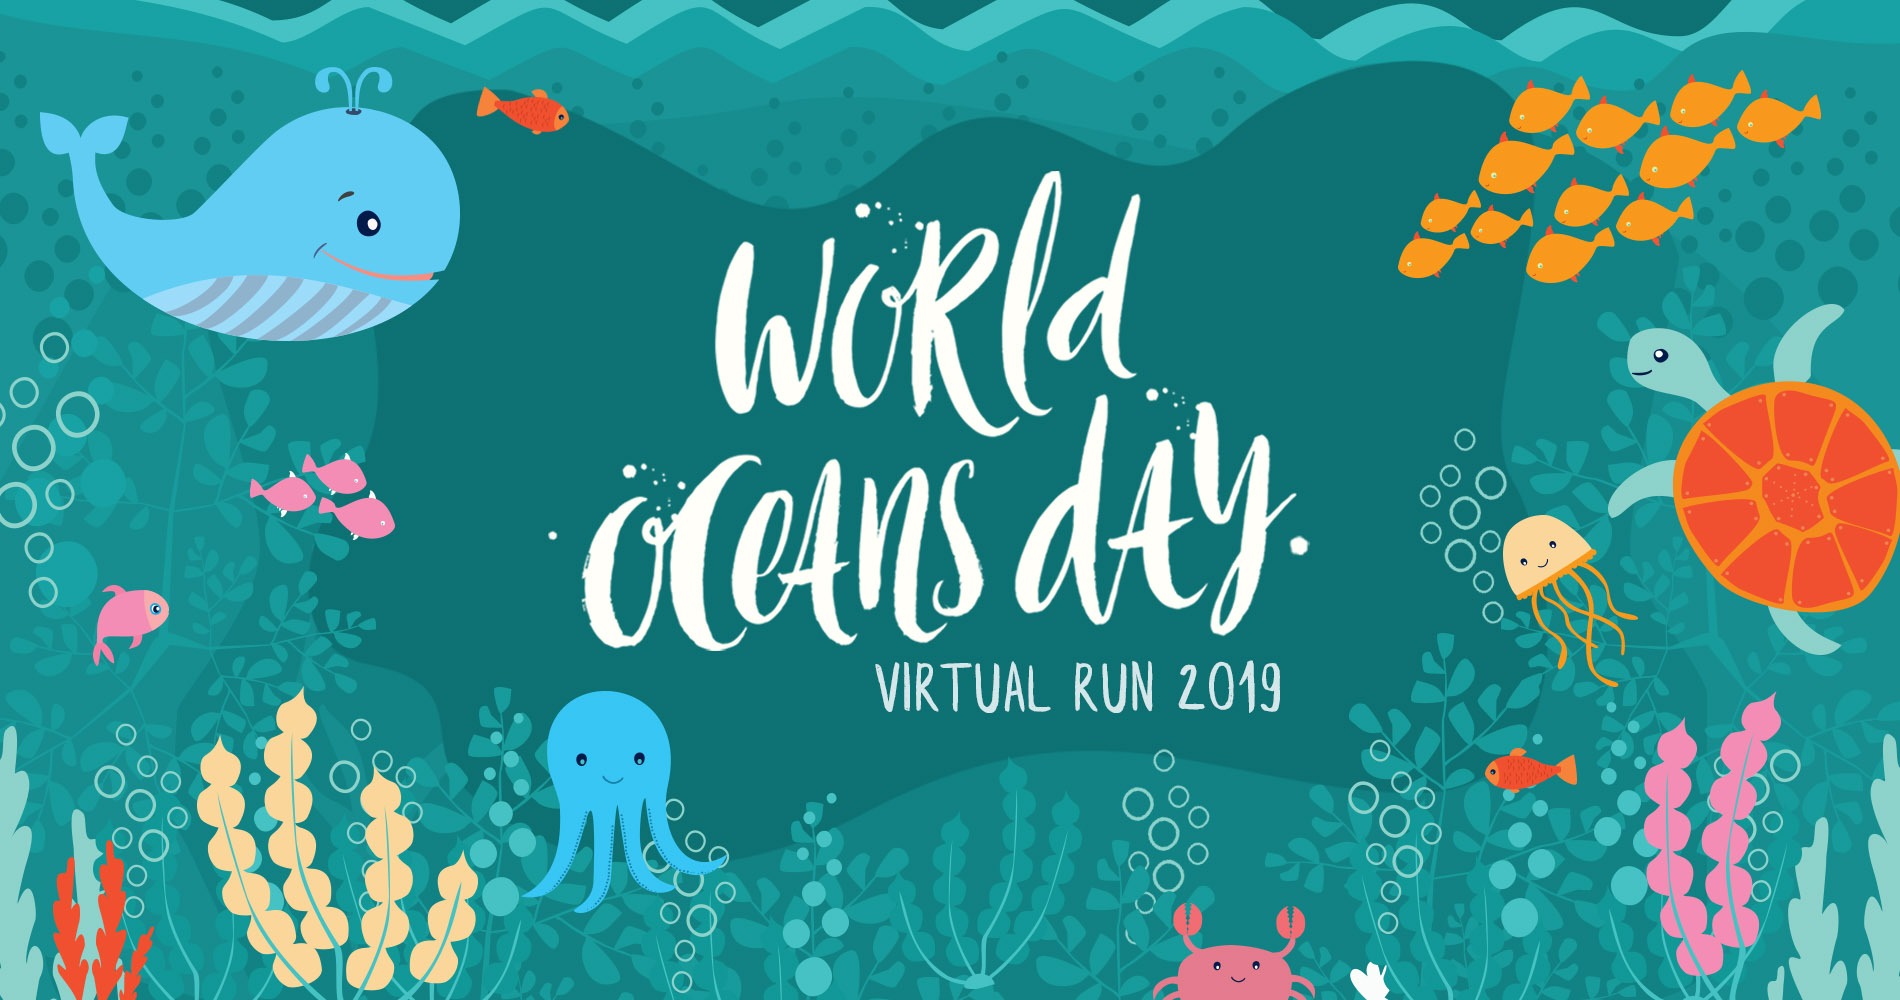 World Oceans Day 2019: Objective, Themes And Major Things to Know About the Condition of Our Oceans!